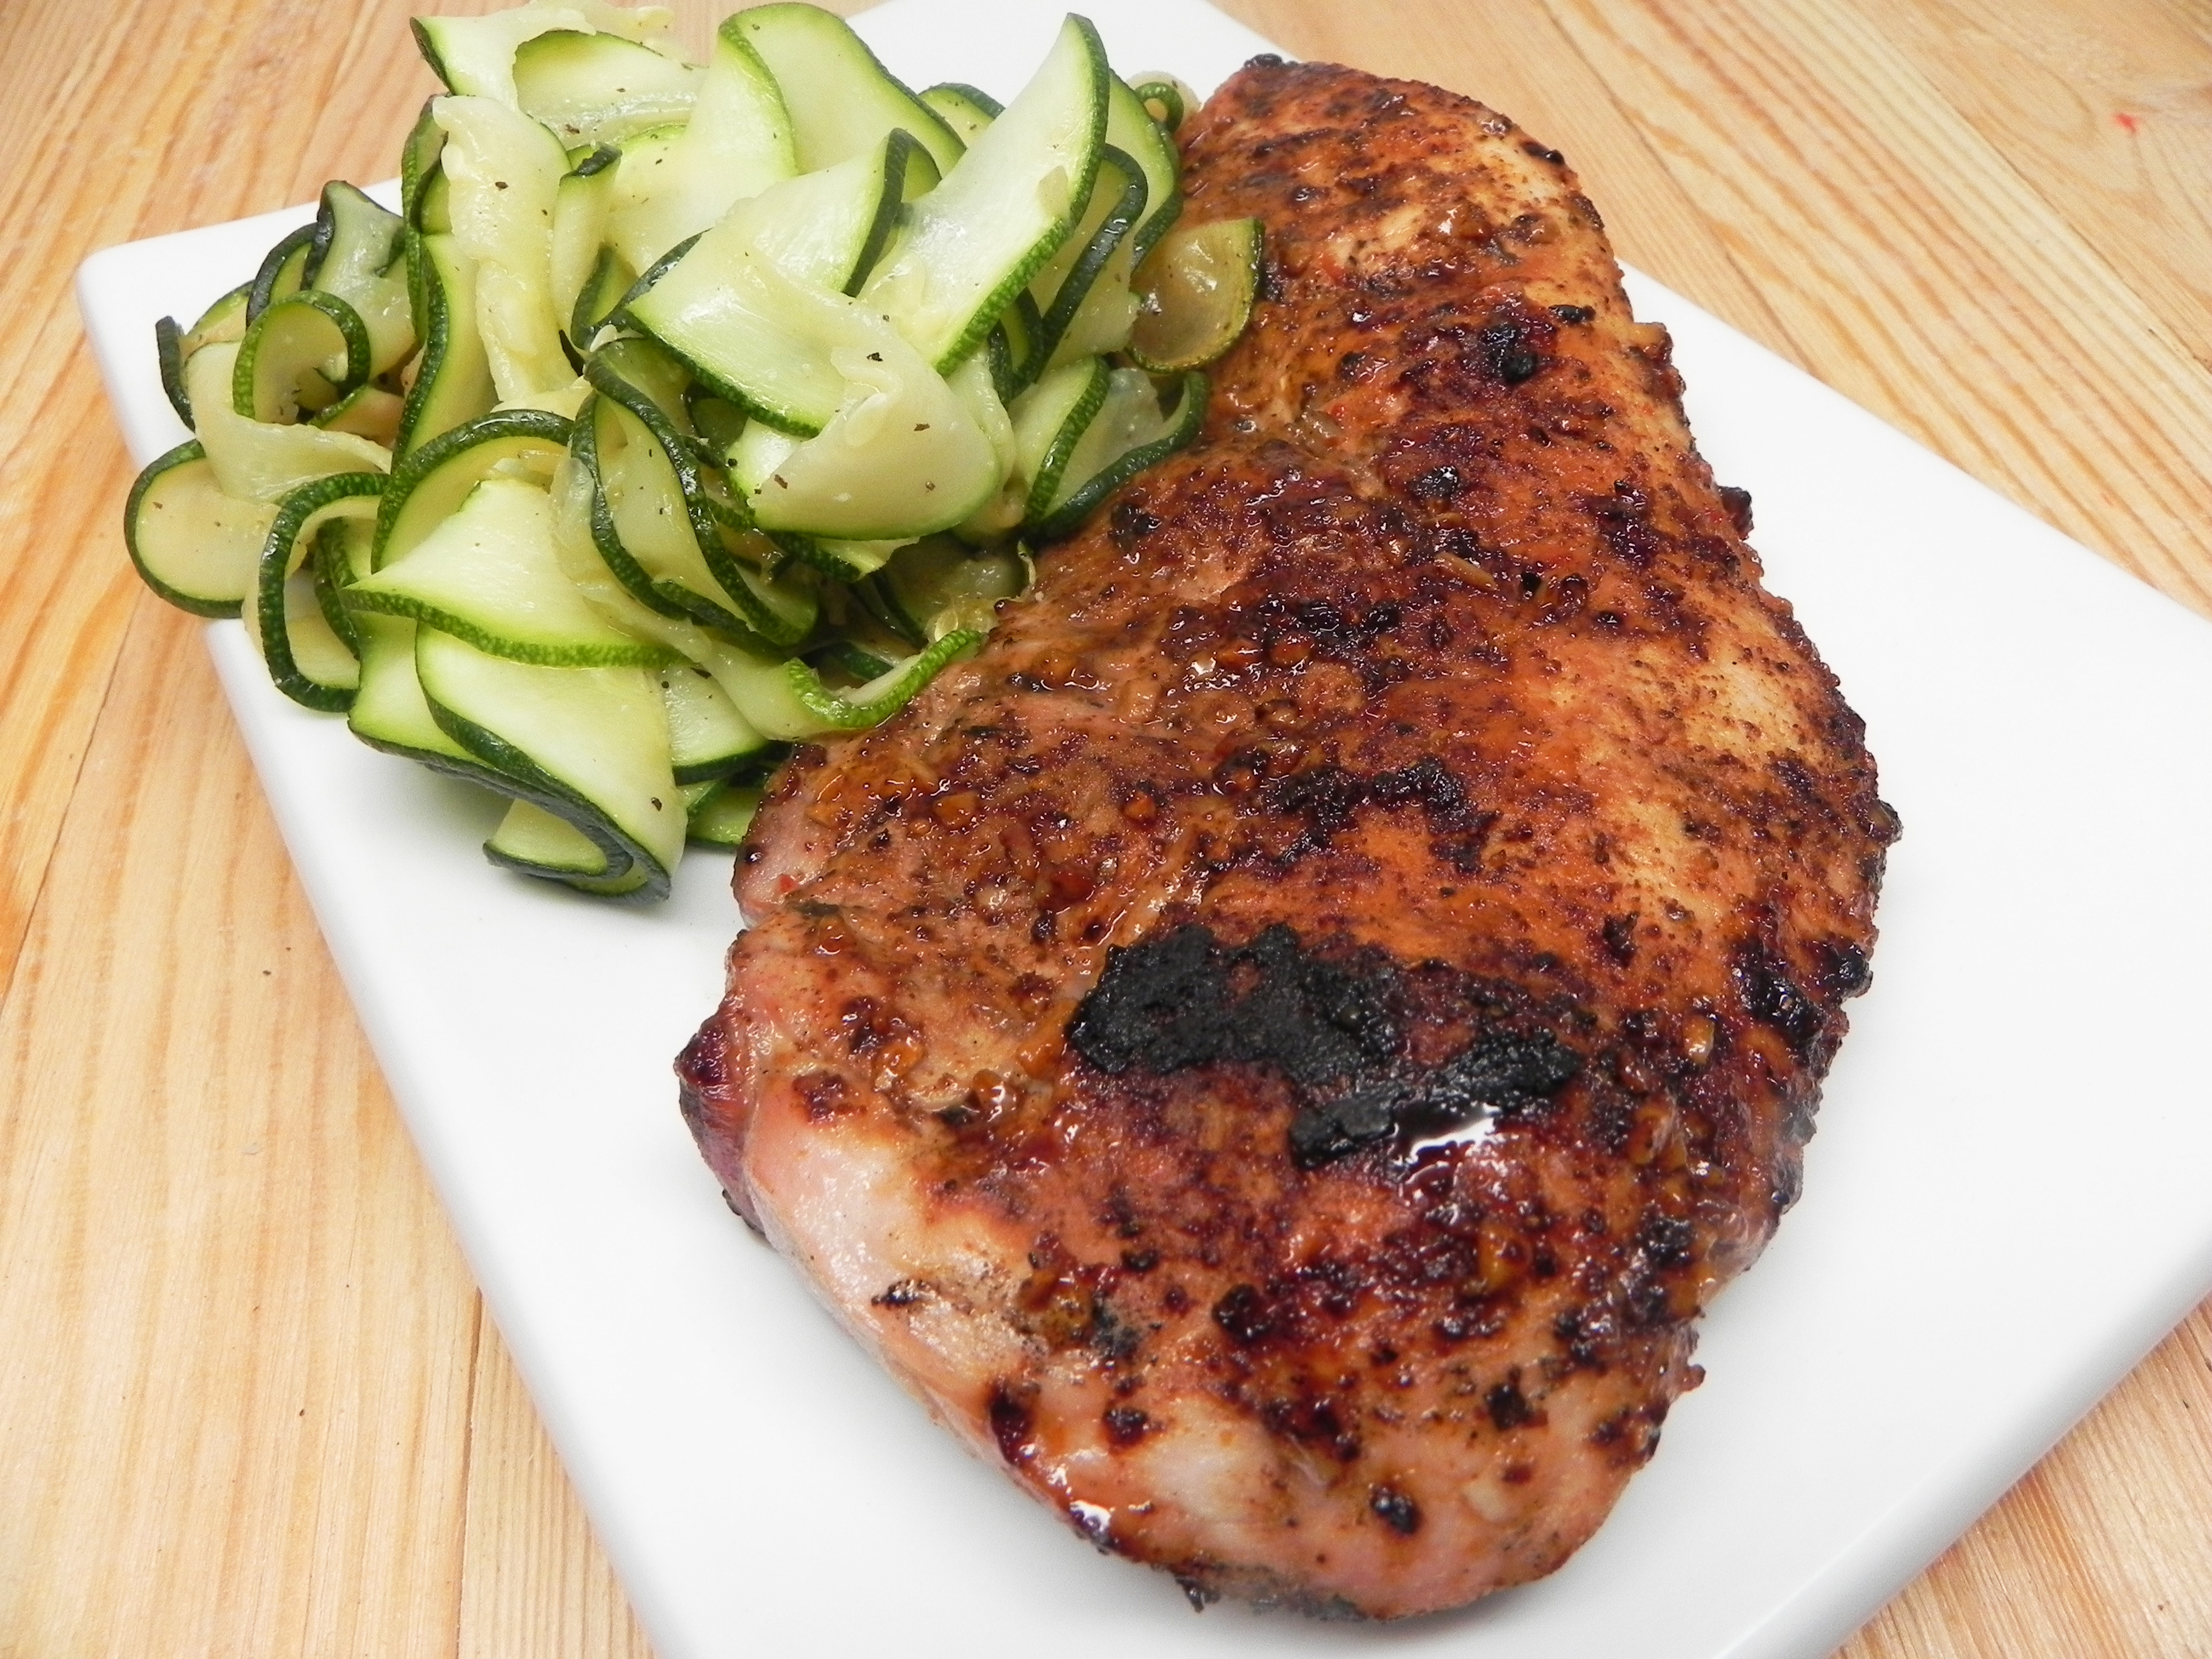 Pan-Grilled Pork with Zucchini Garlic Ribbons